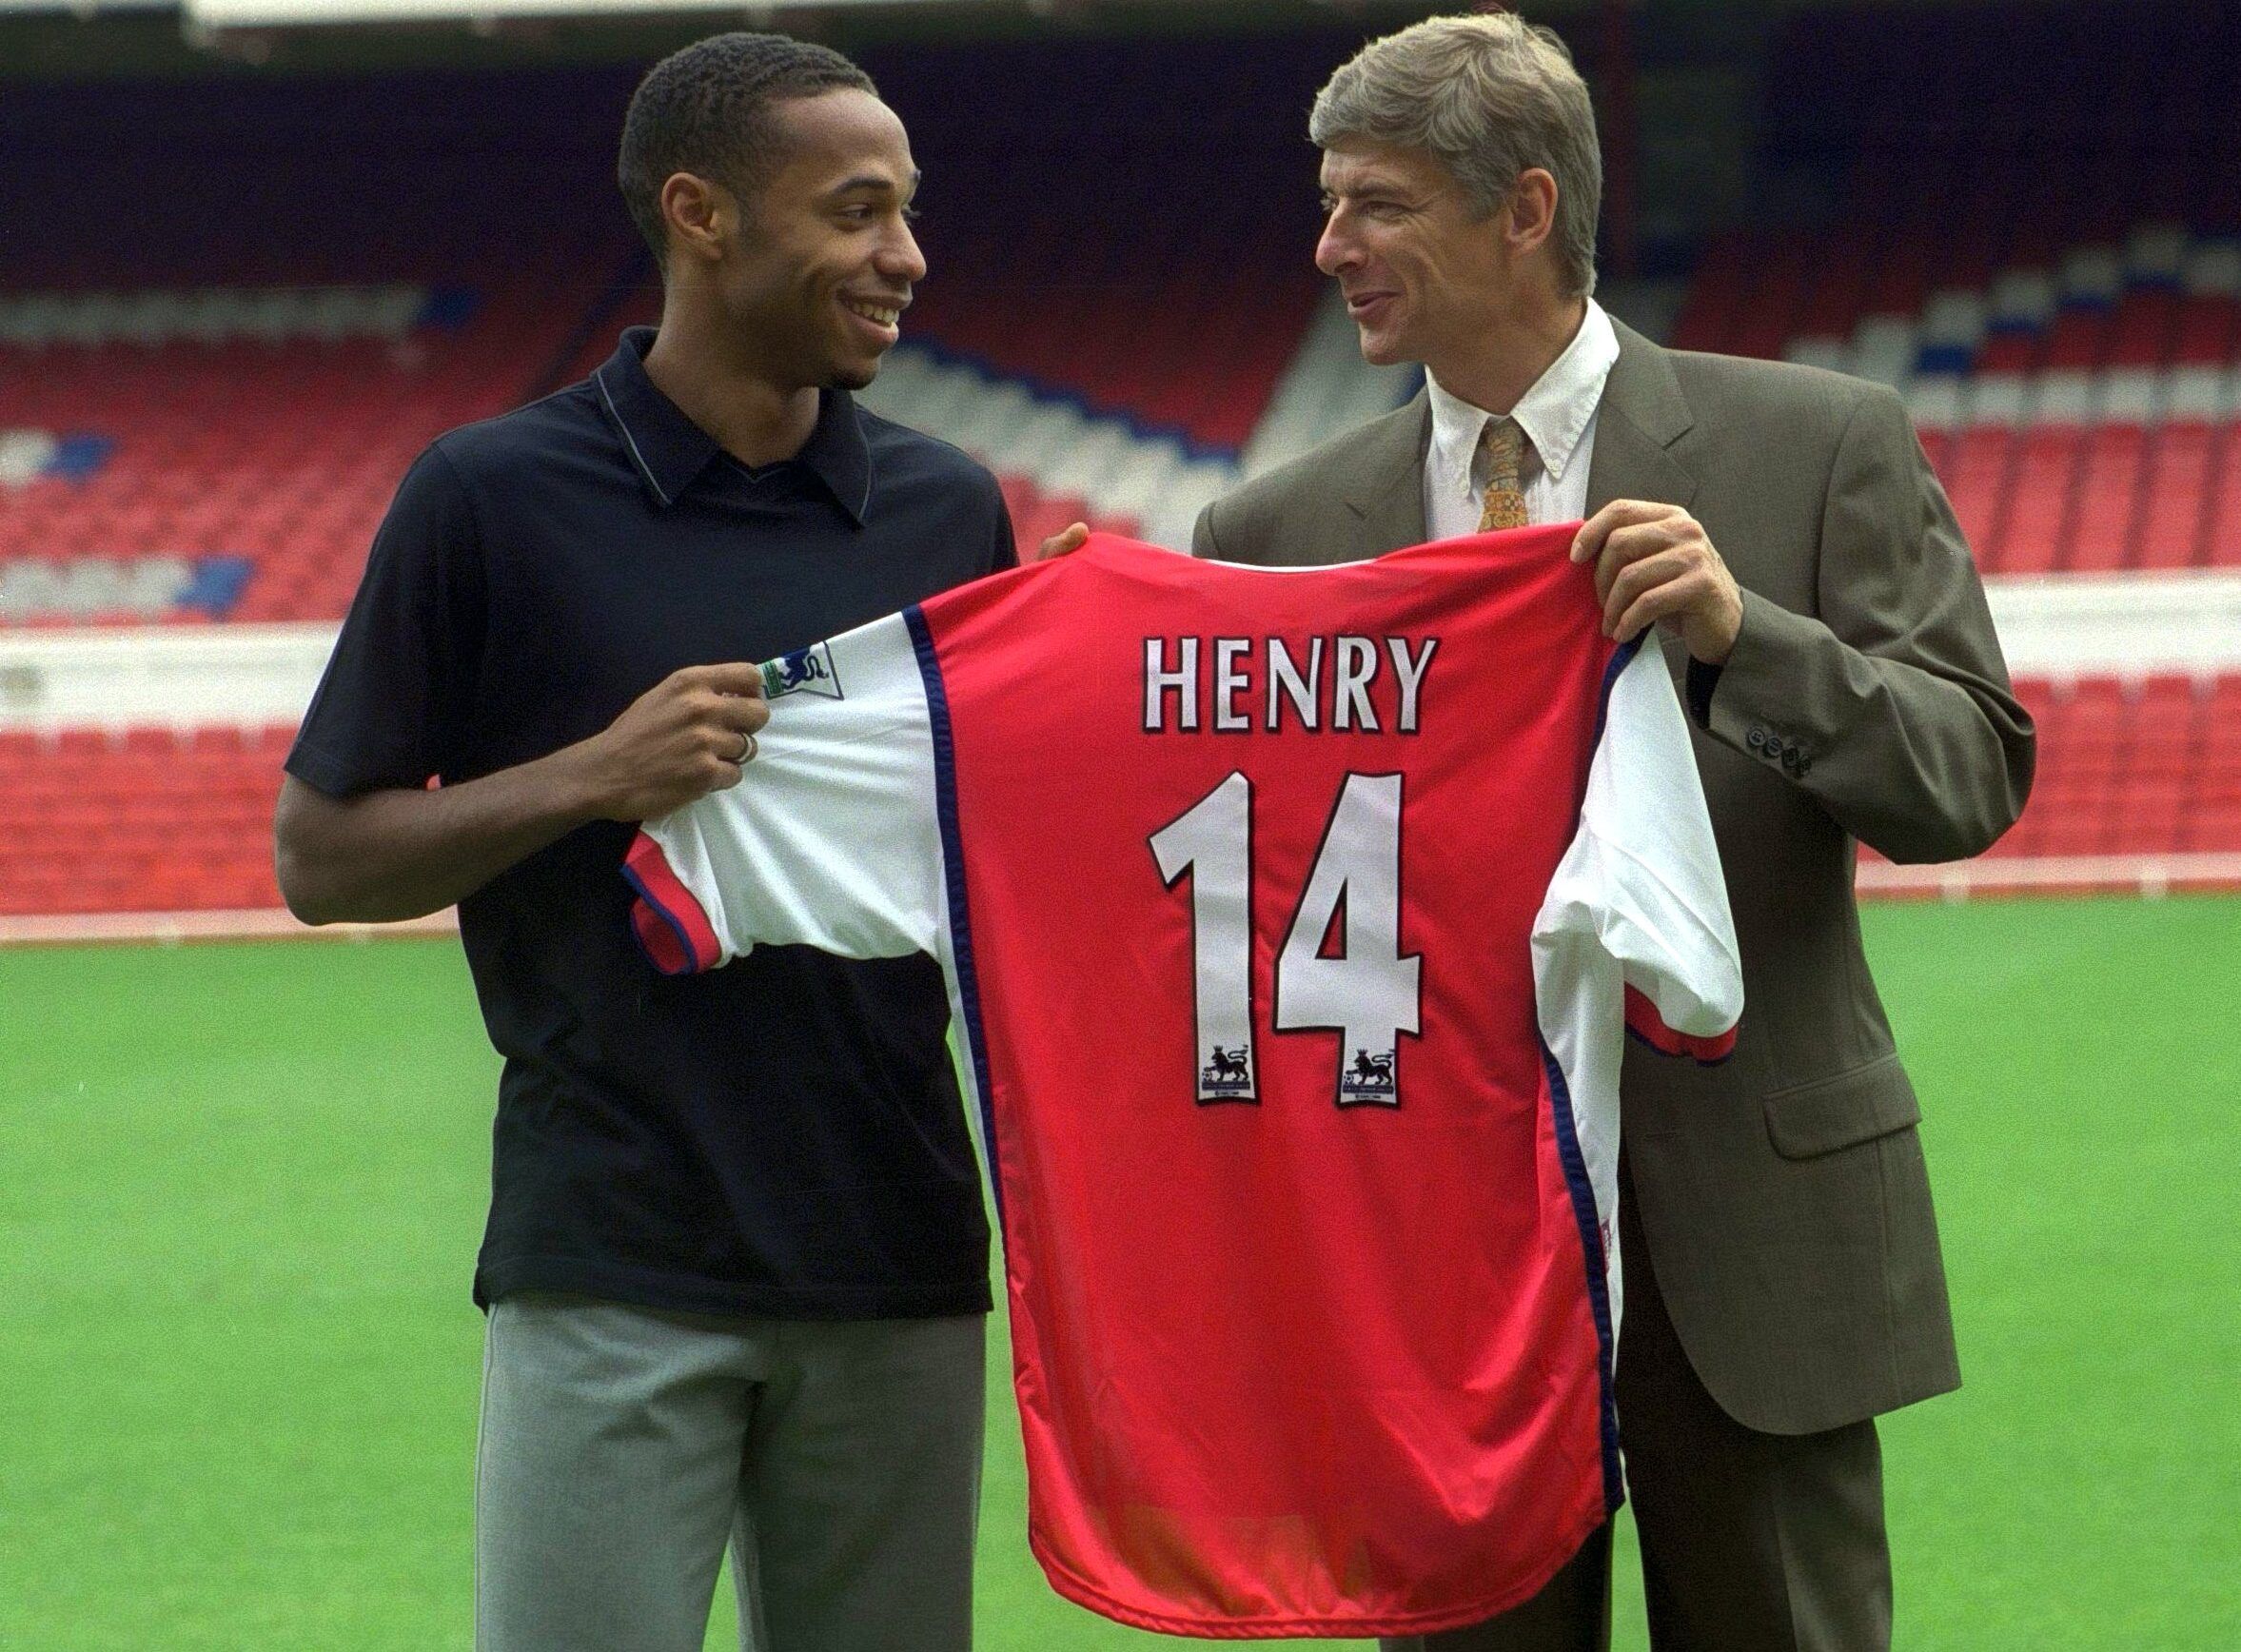 Football - Arsenal Press Conference - Highbury - 3/8/99 
New Signing Thierry Henry holds his Number 14 shirt with Arsene Wenger - Arsenal Manager 
Mandatory Credit: Action Images / Andrew Couldridge